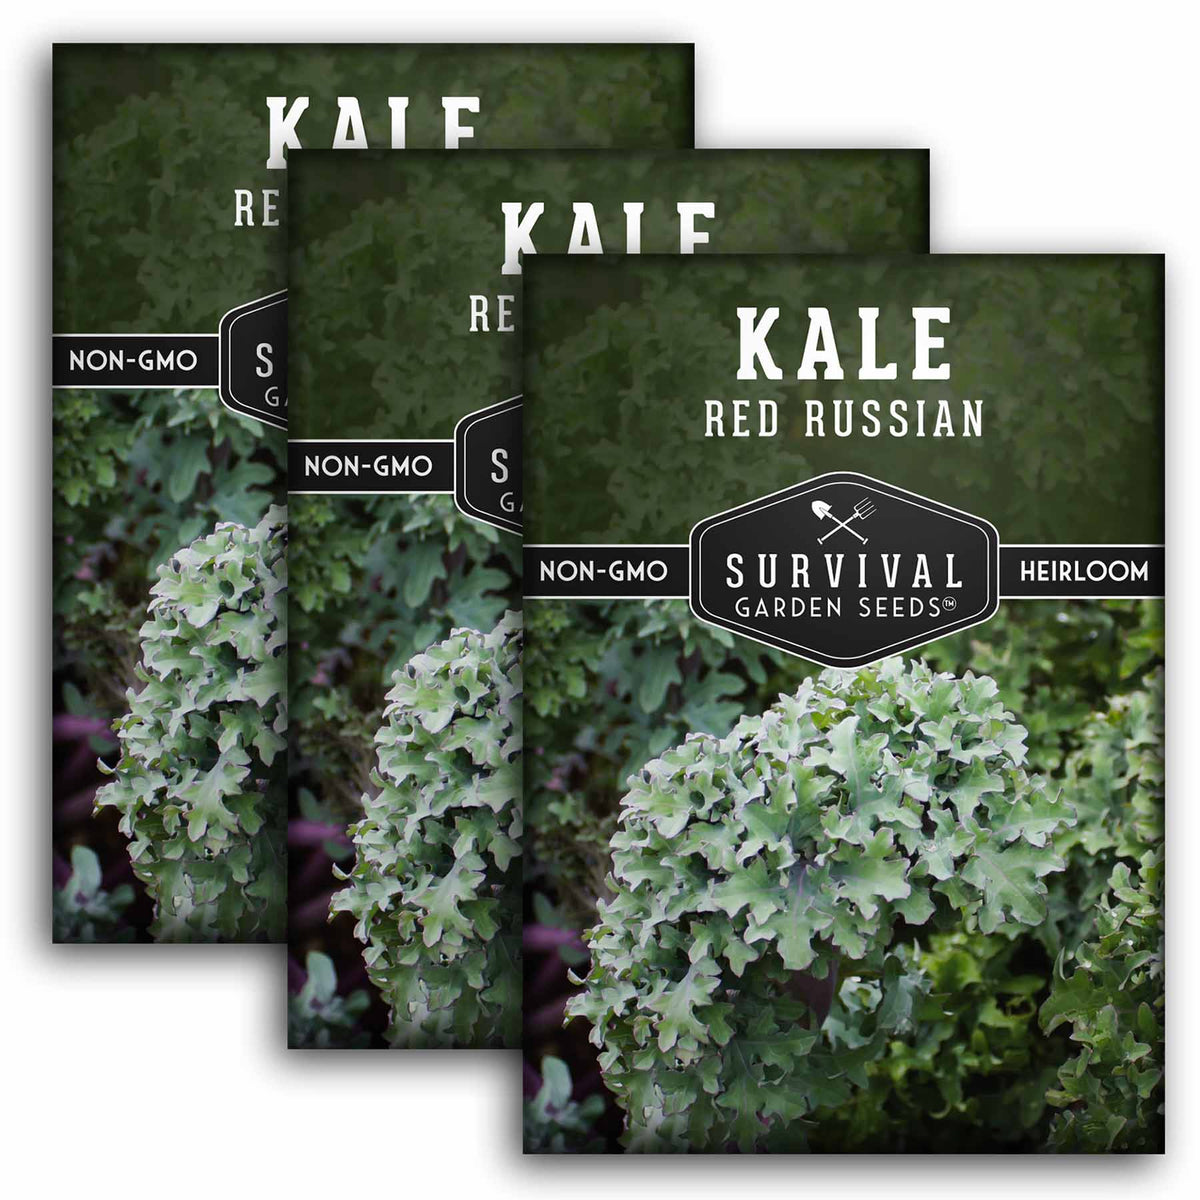 3 packets of Red Russian Kale seeds